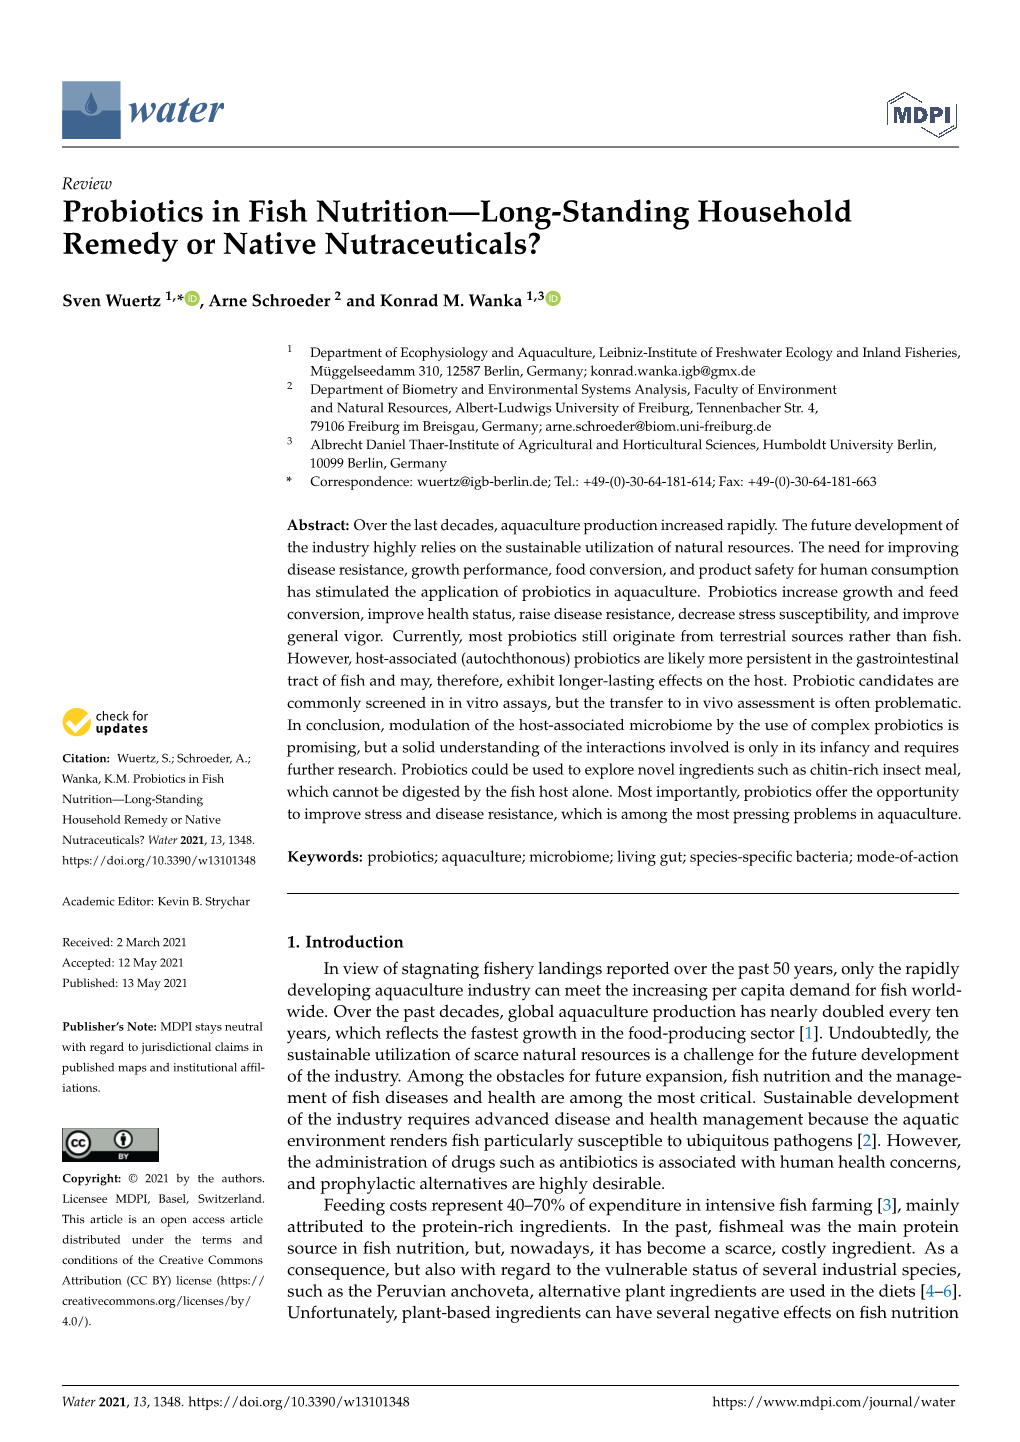 Probiotics in Fish Nutrition—Long-Standing Household Remedy Or Native Nutraceuticals?